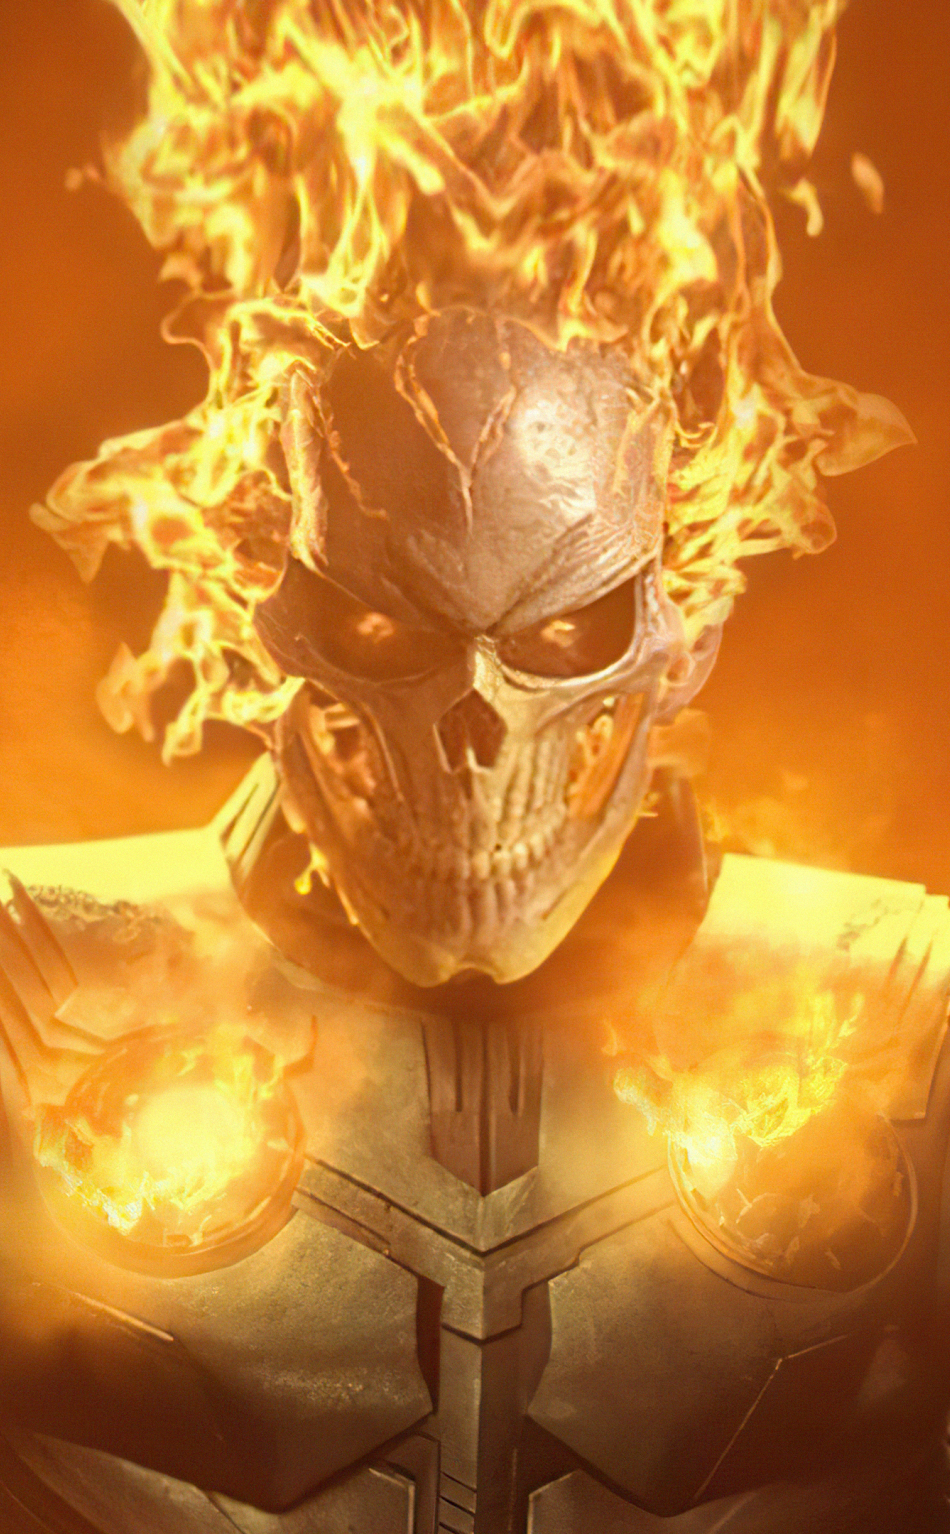 Download wallpaper 950x1534 ghost rider, fire flames, superhero, iphone,  950x1534 hd background, 26948